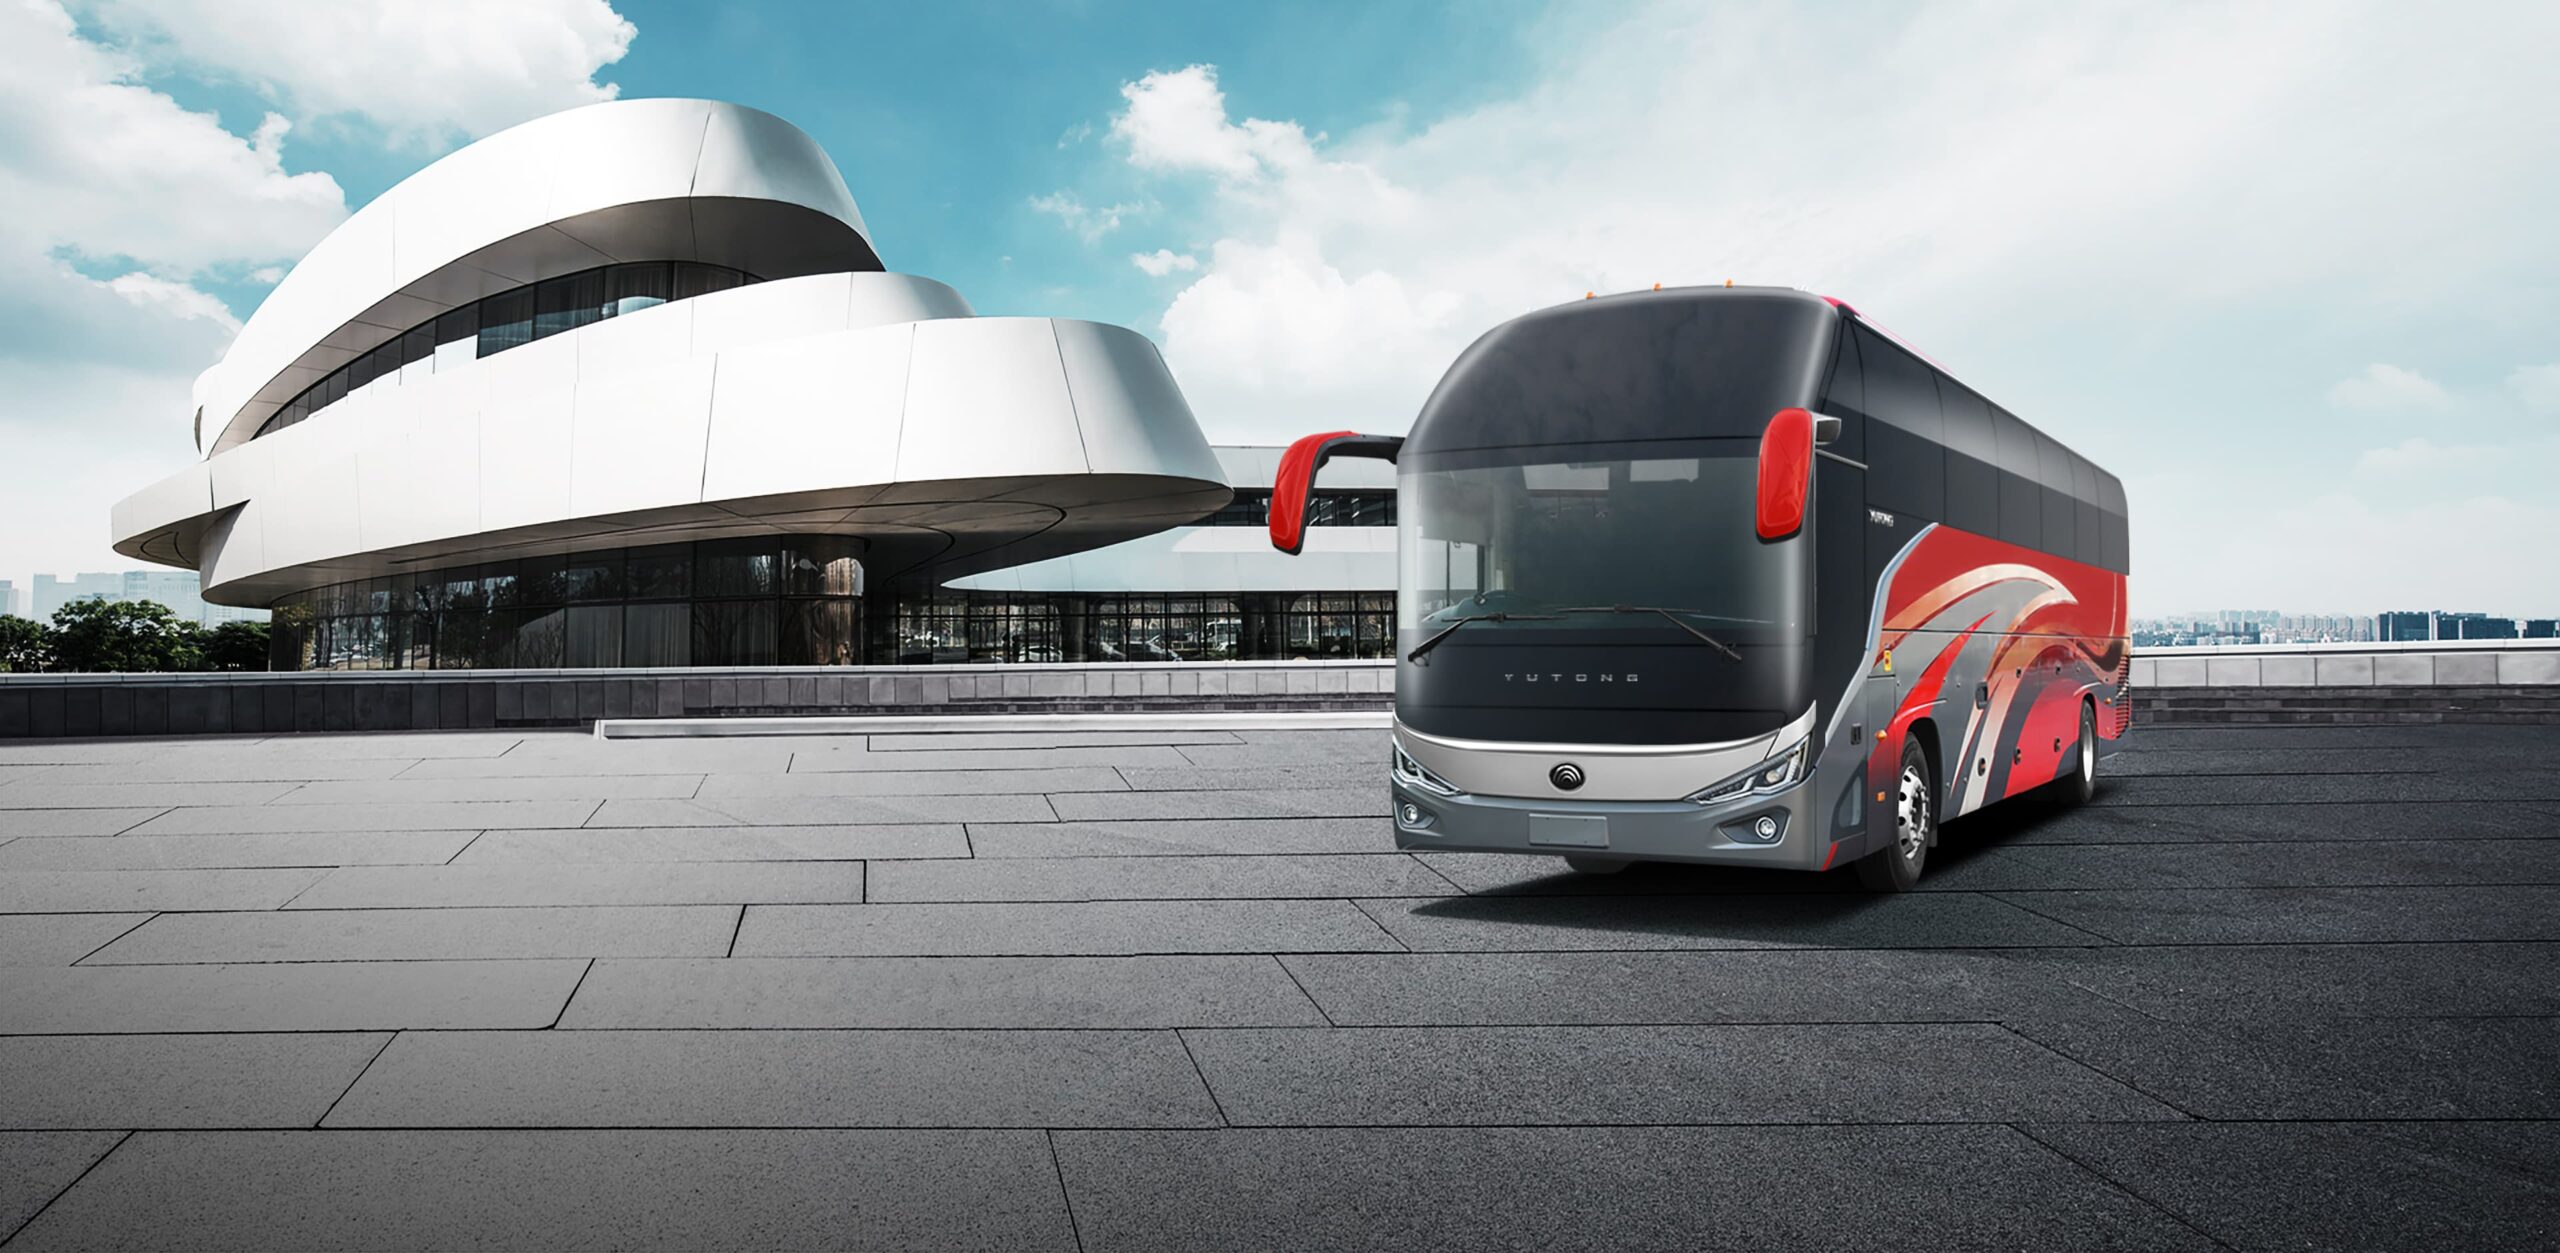 Dubai 50-seater super luxury bus rental for ultimate group travel.